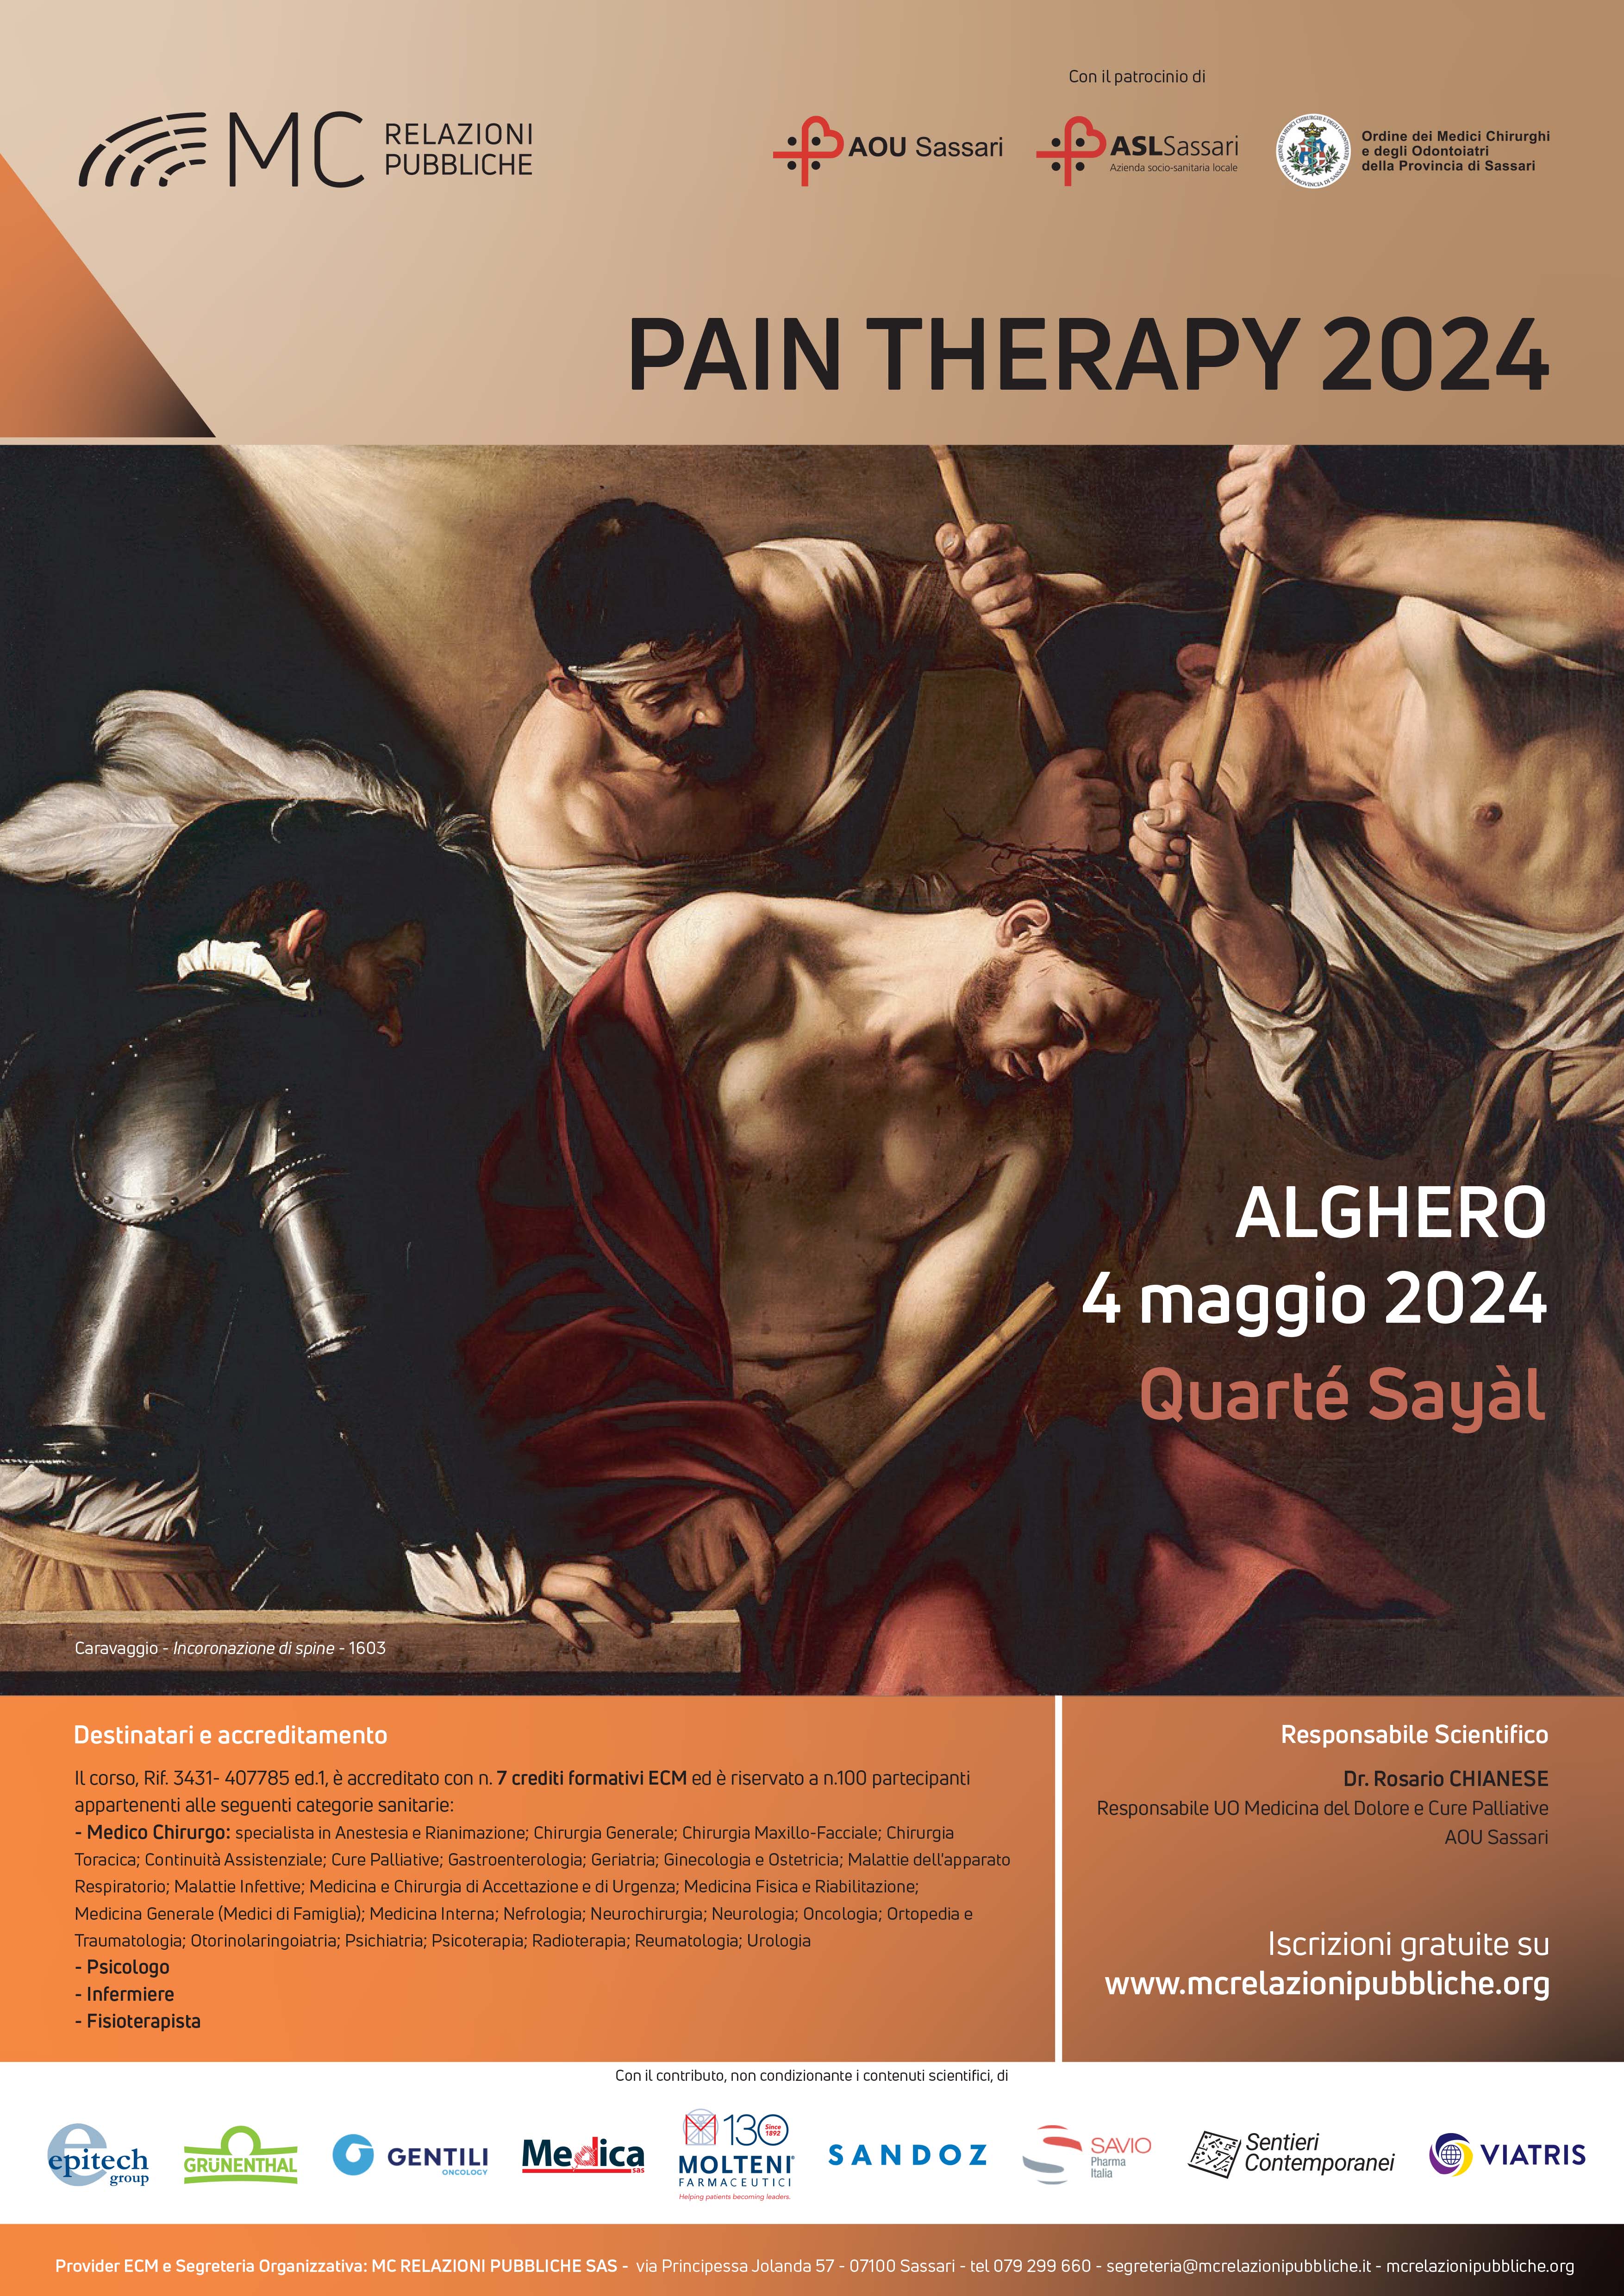 PAIN THERAPY 2024